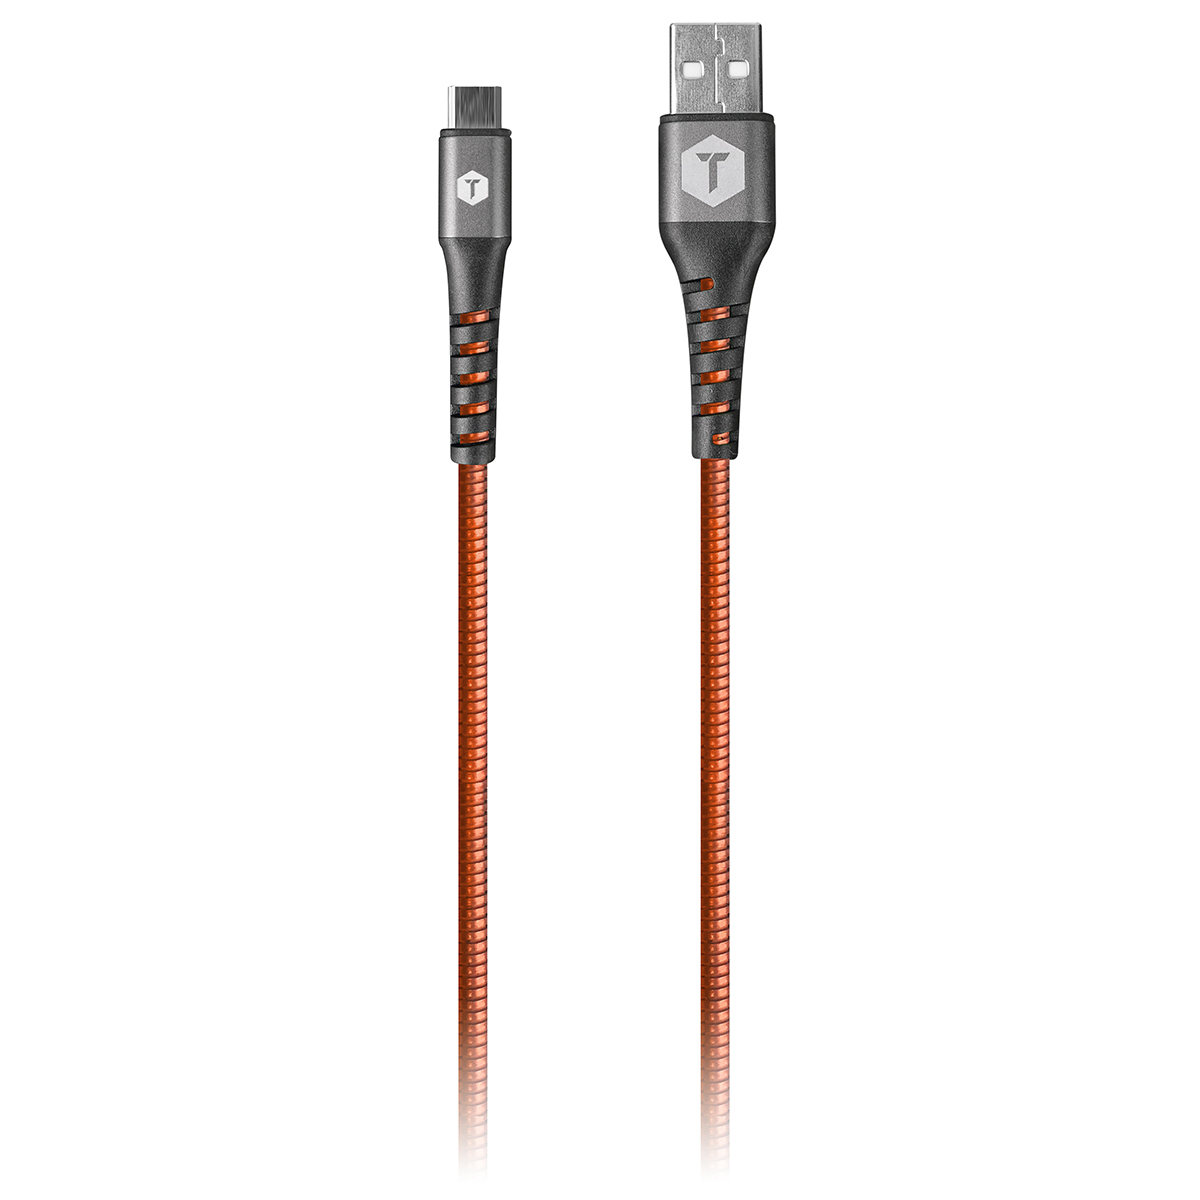 Tough Tested 2-Foot Armor-Flex Type C to A Cable 2FT TTAMC2C2A Super Durable Power Cord for Phone Tablet-Orange